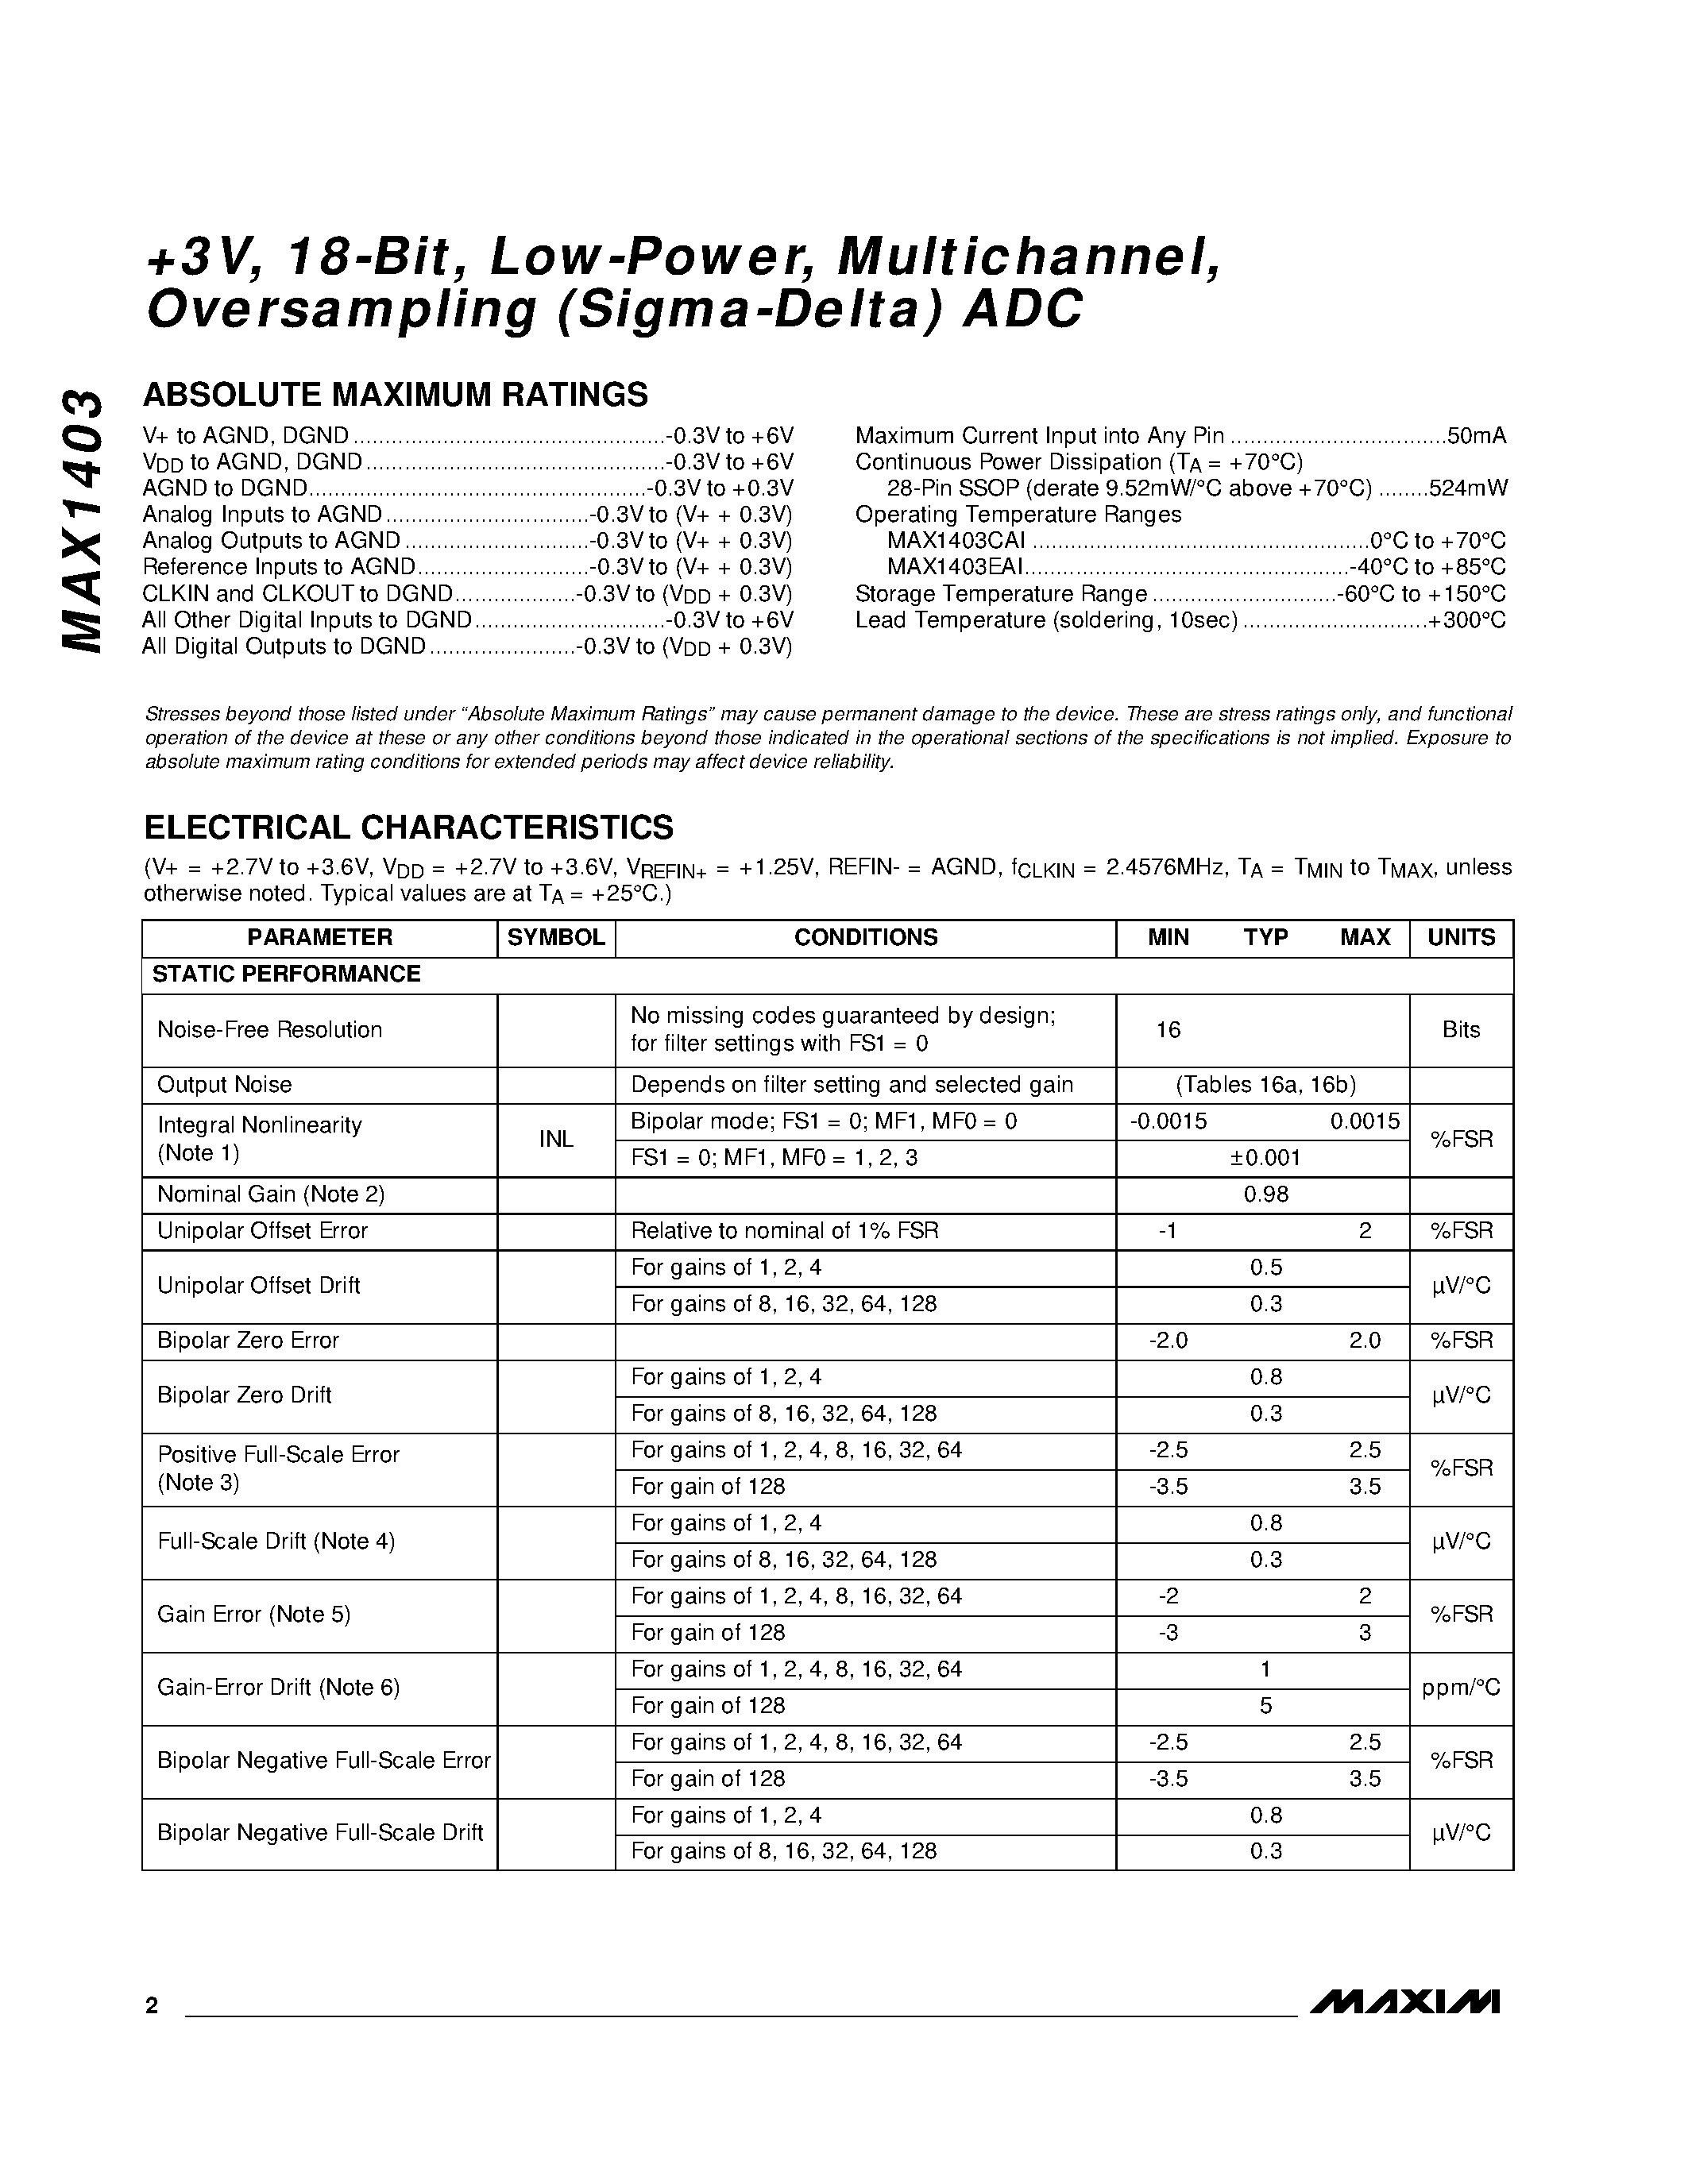 Datasheet MAX1403CAI - +3V / 18-Bit / Low-Power / Multichannel / Oversampling Sigma-Delta ADC page 2